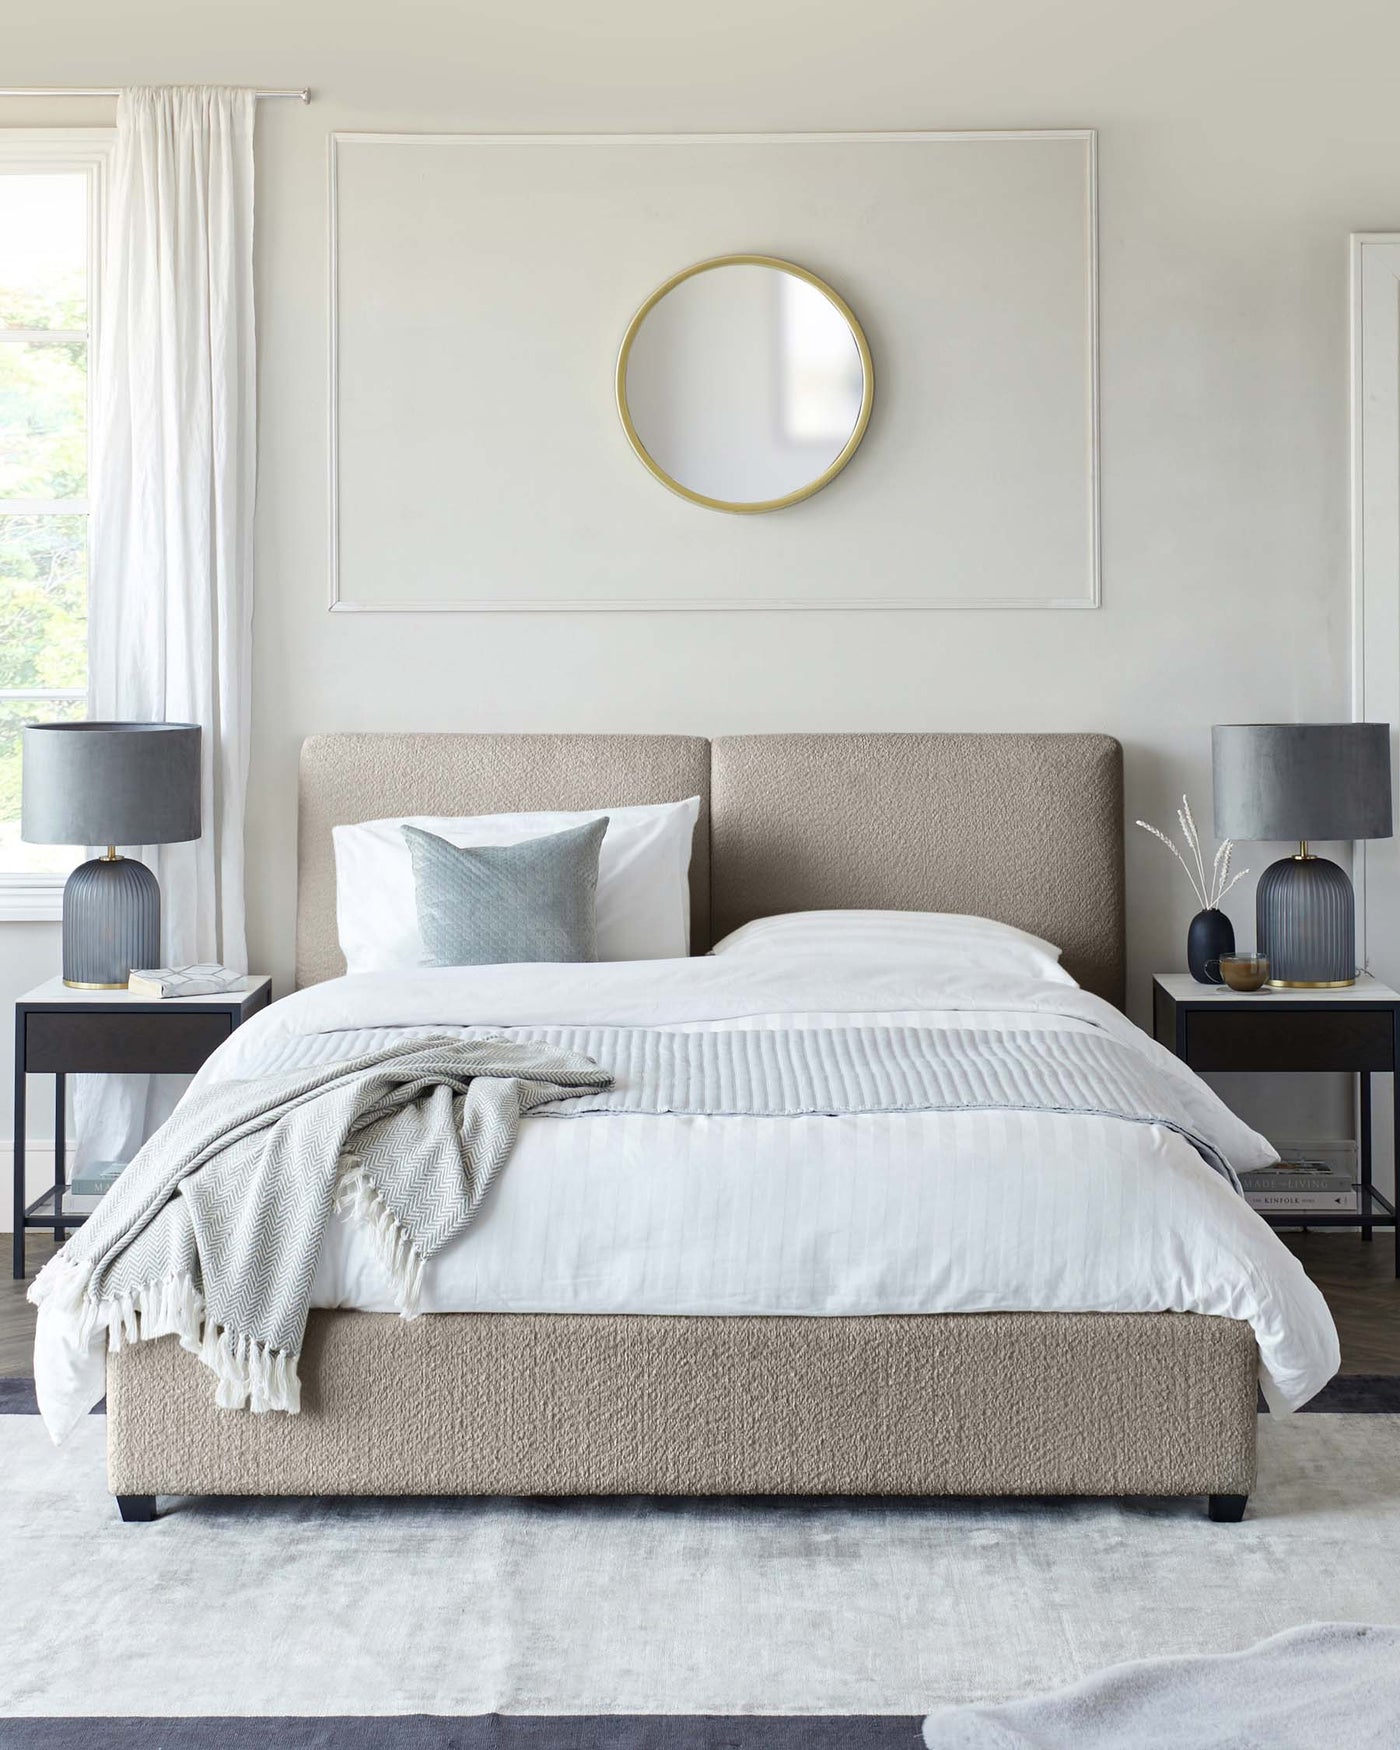 Contemporary bedroom furniture set featuring a neutral-toned upholstered platform bed with a high headboard, flanked by two modern black nightstands topped with stylish deep blue-grey lamps, all set against a serene light grey and white colour palette. A round mirror with a thin gold frame hangs above the bed for a touch of elegance.